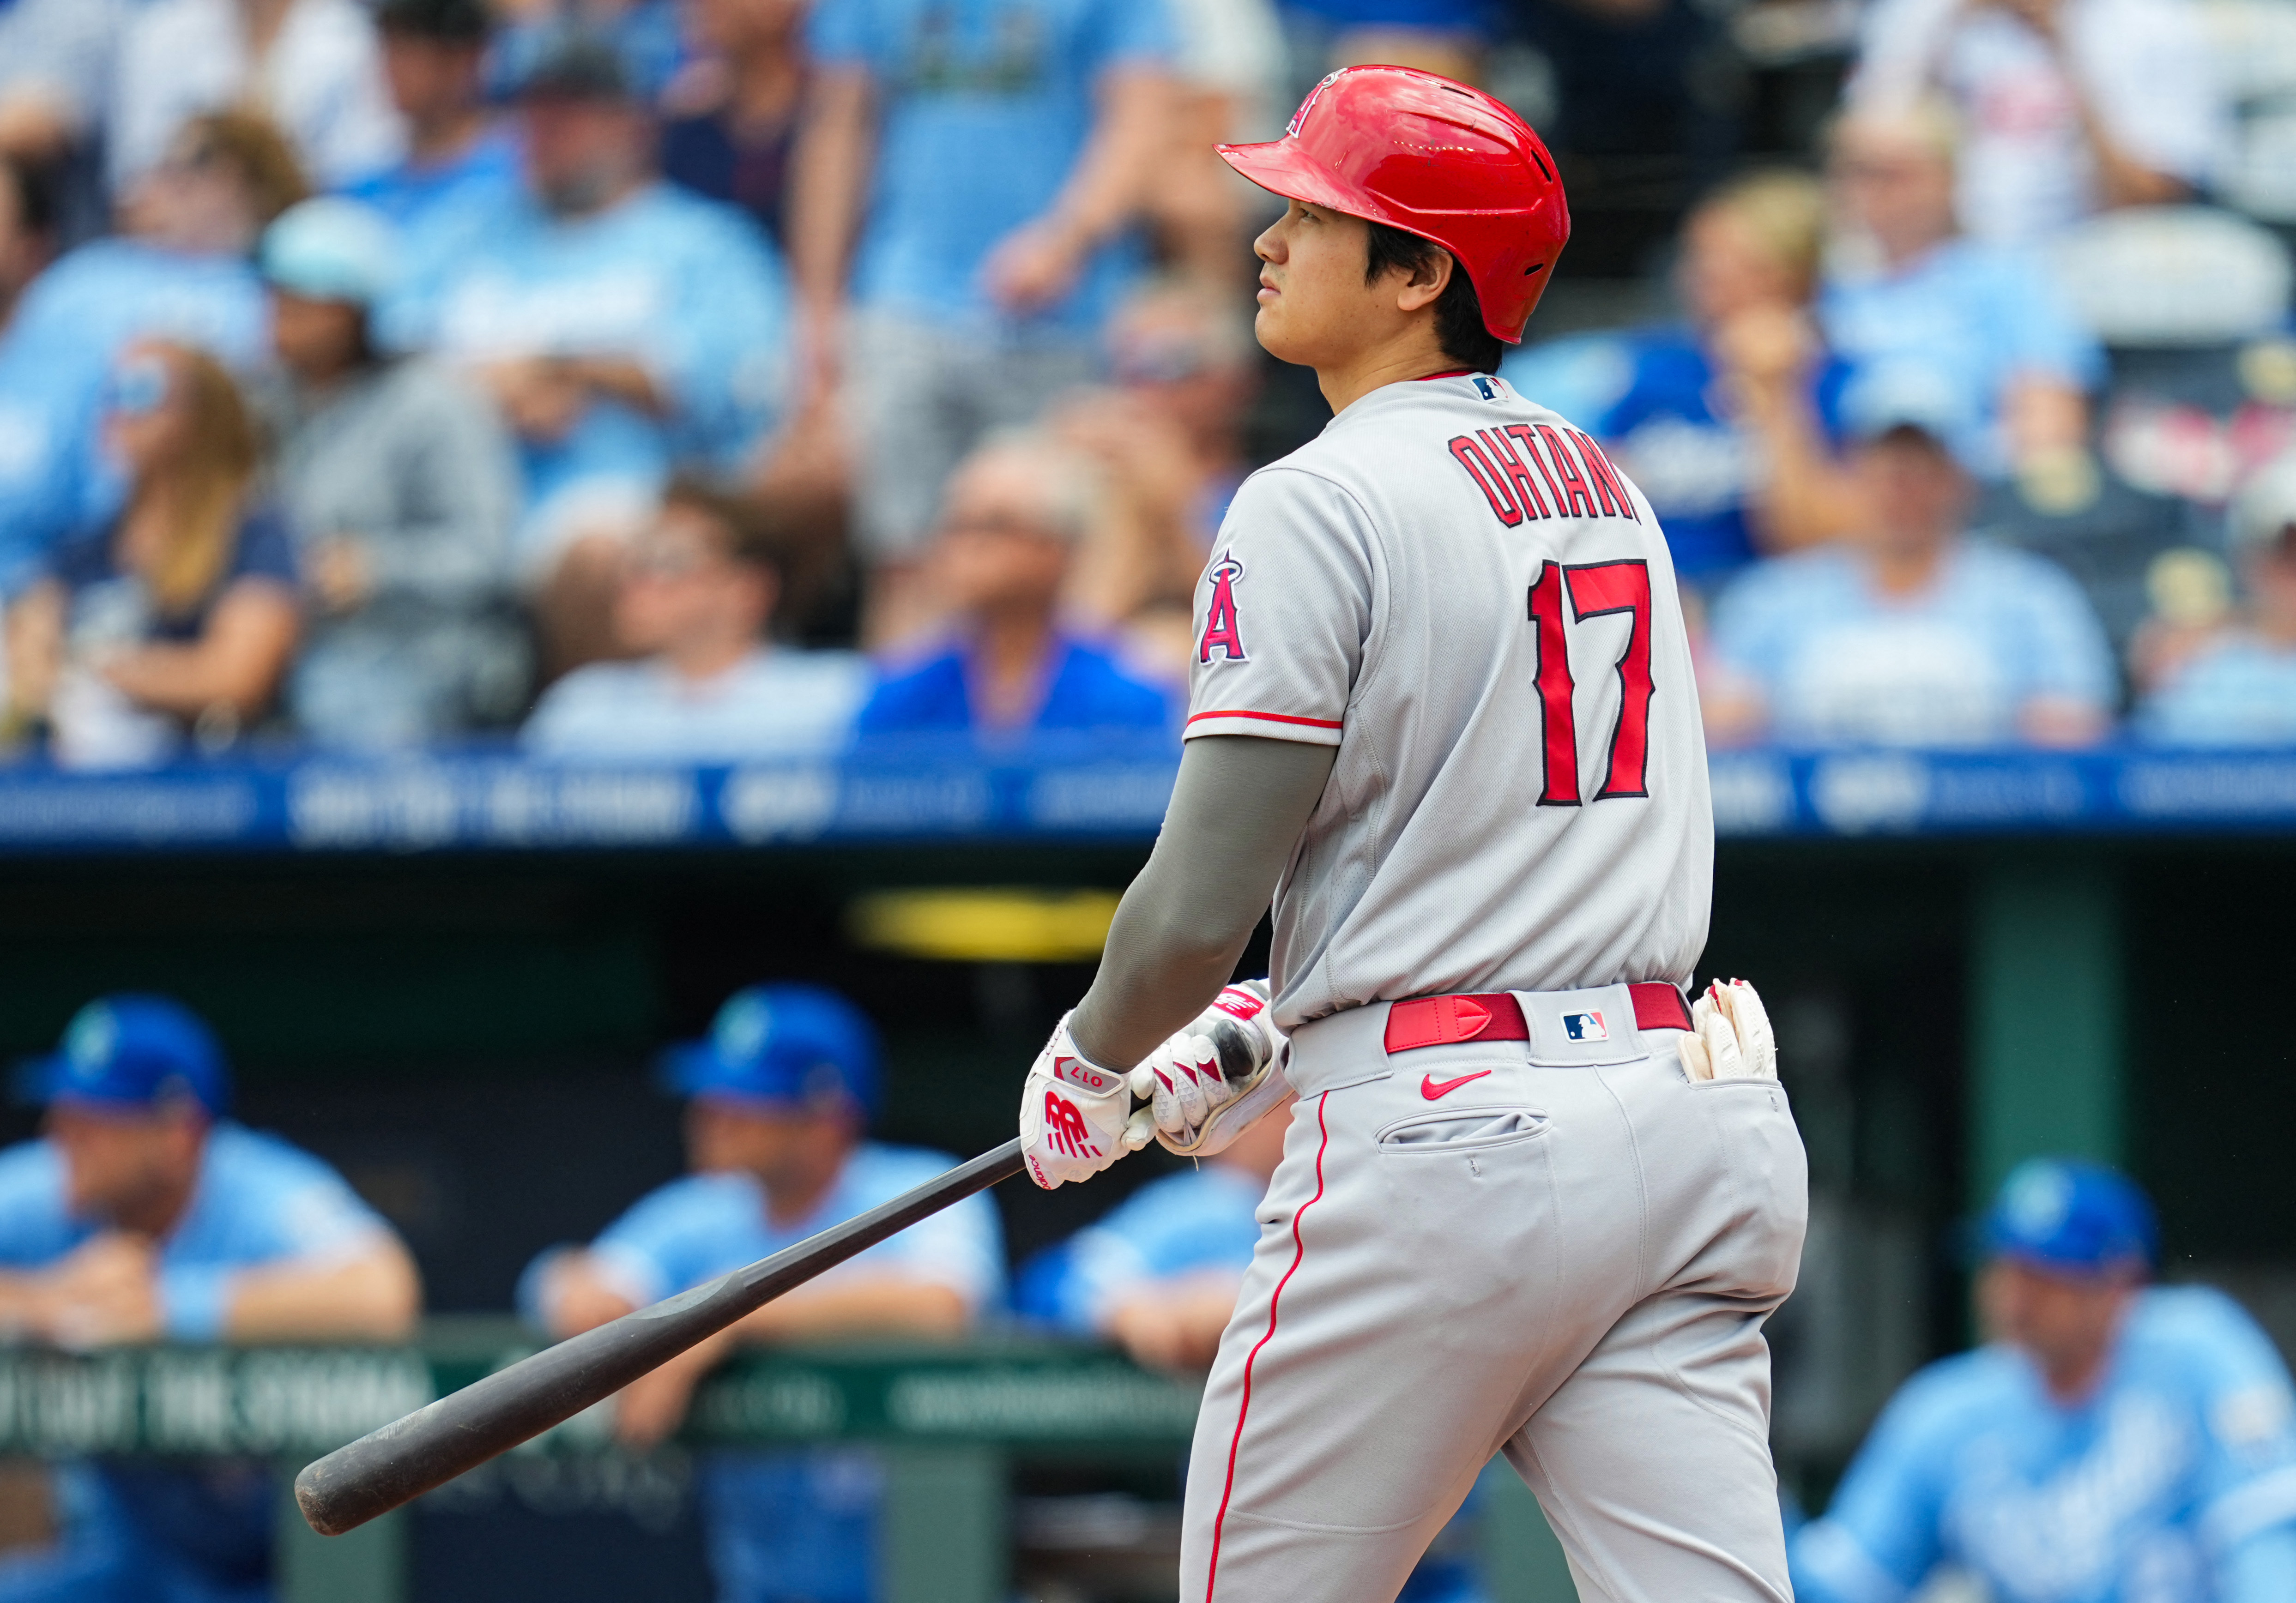 Ohtani, Trout homer to lead Angels past Royals 5-2 - Newsday